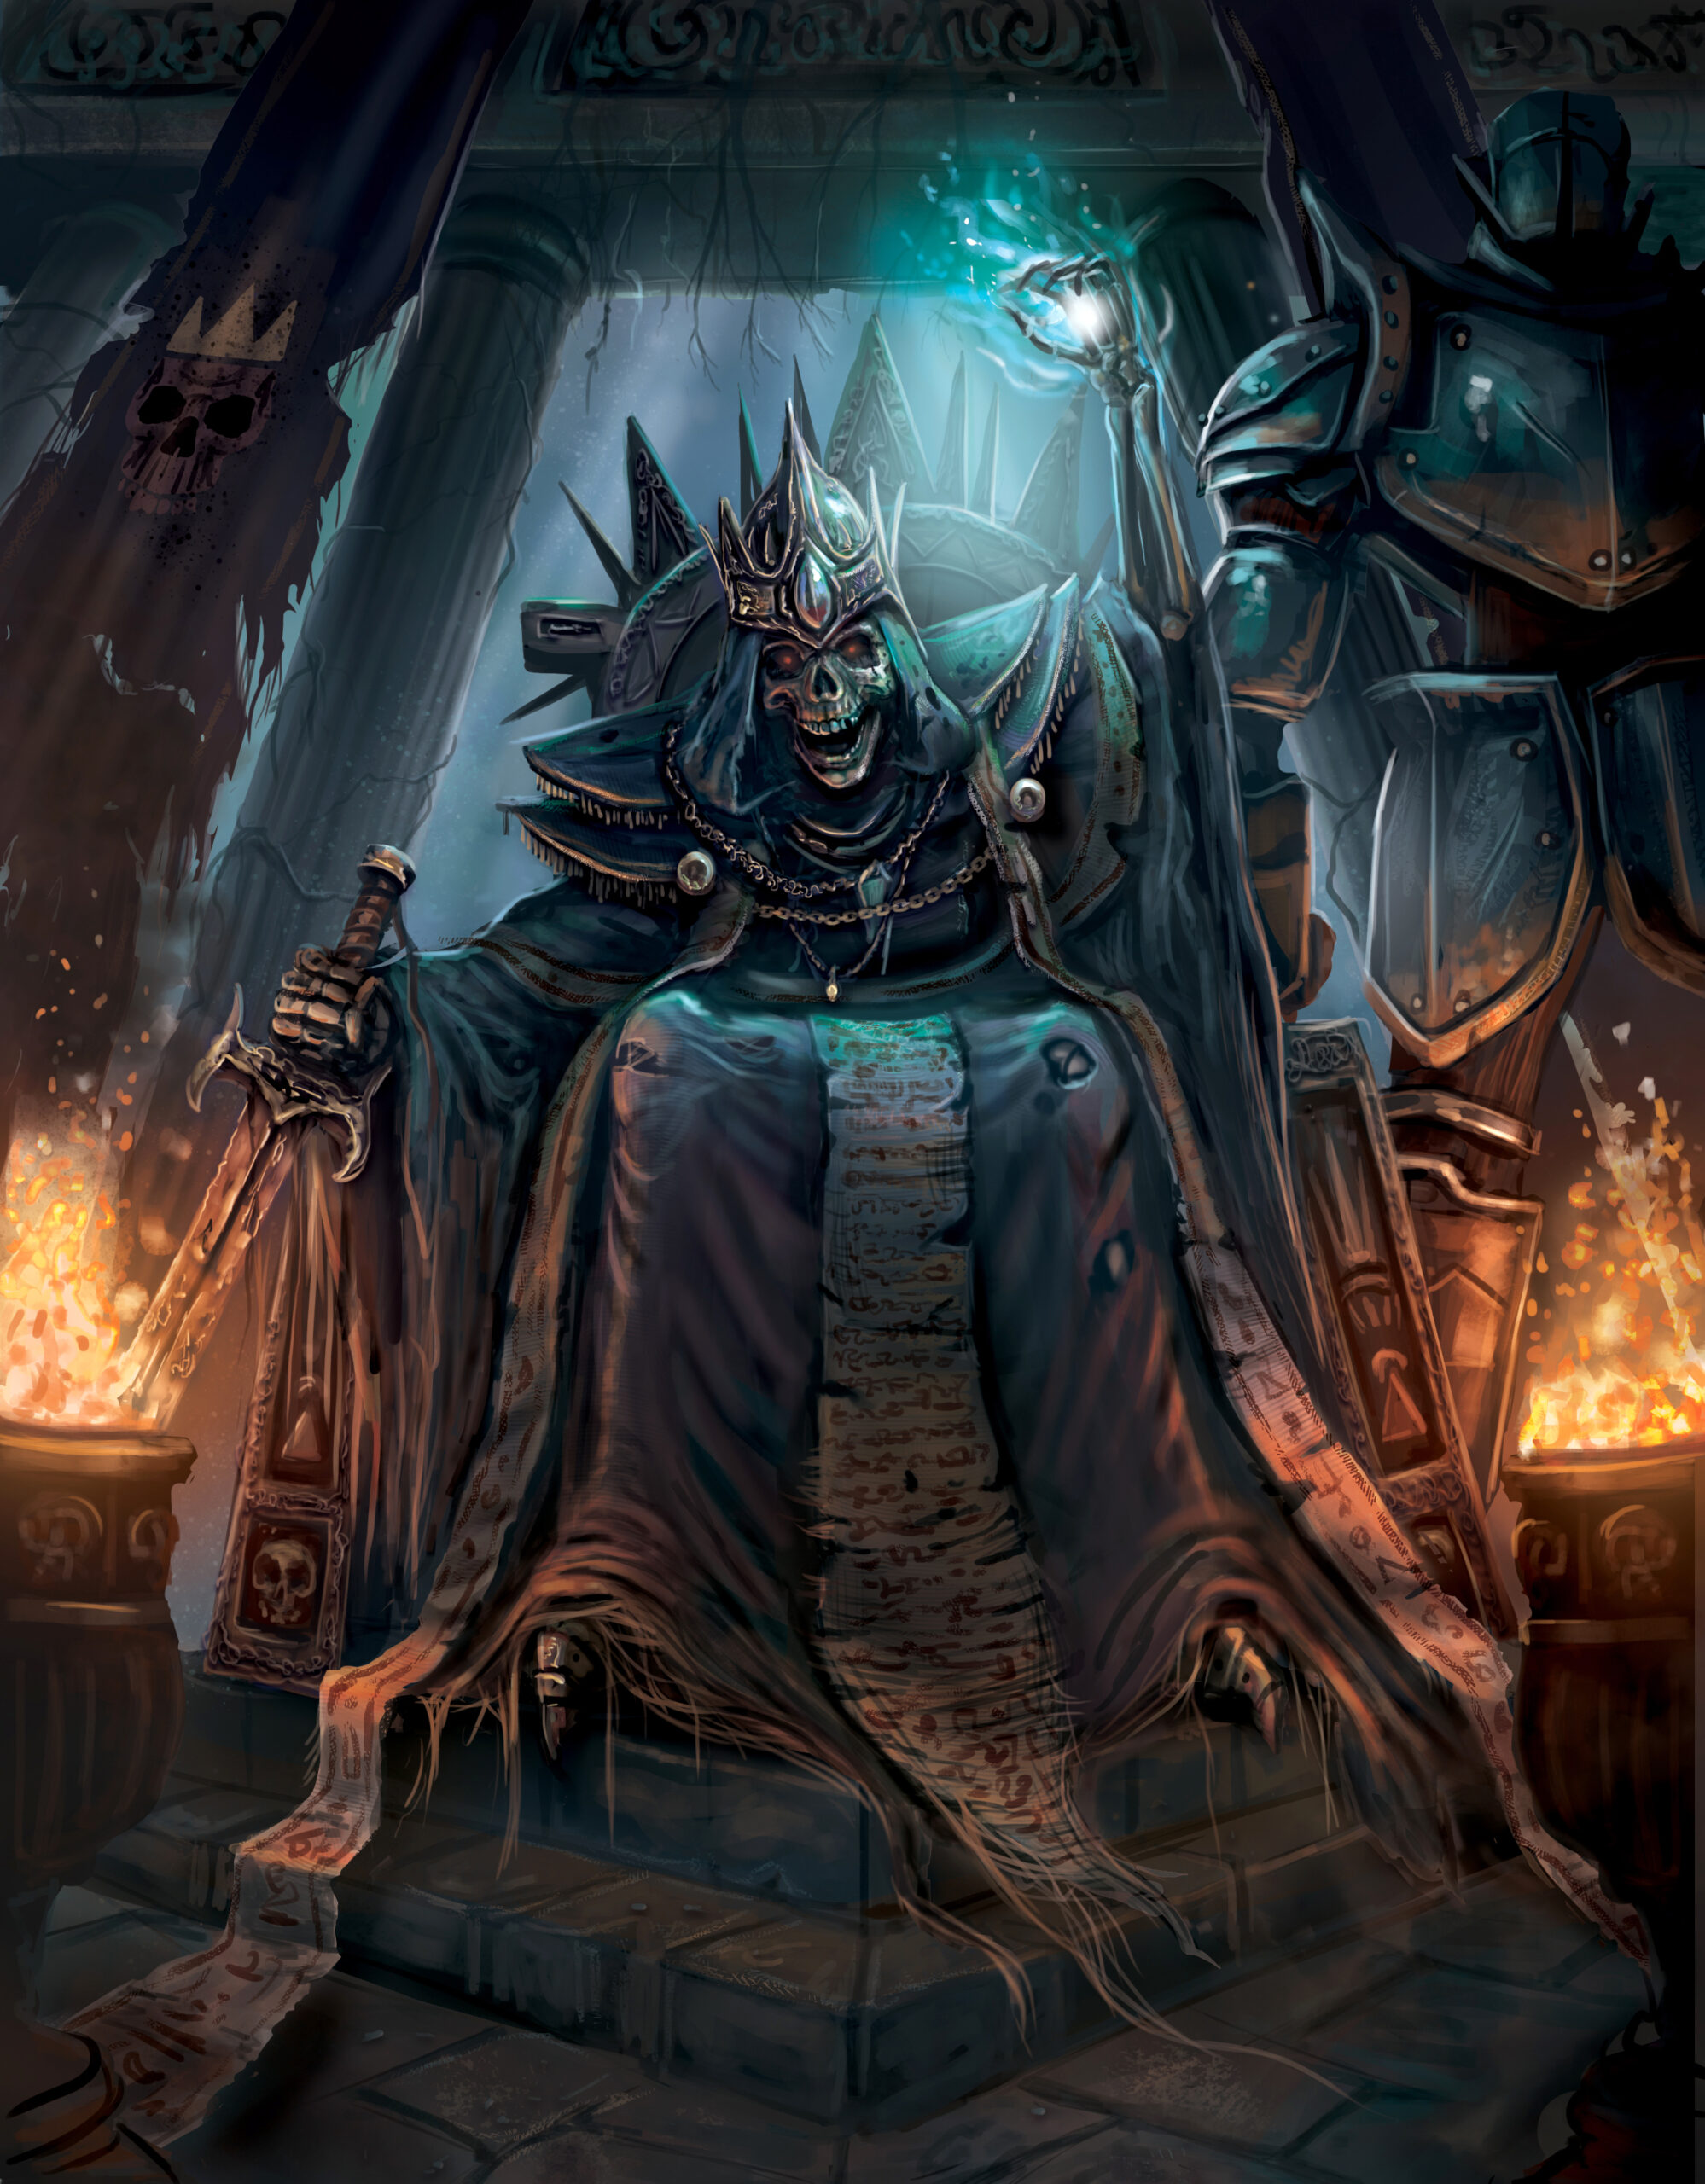 A lich king in his throne room for a dnd campaign. Artwork by The Noble Artist